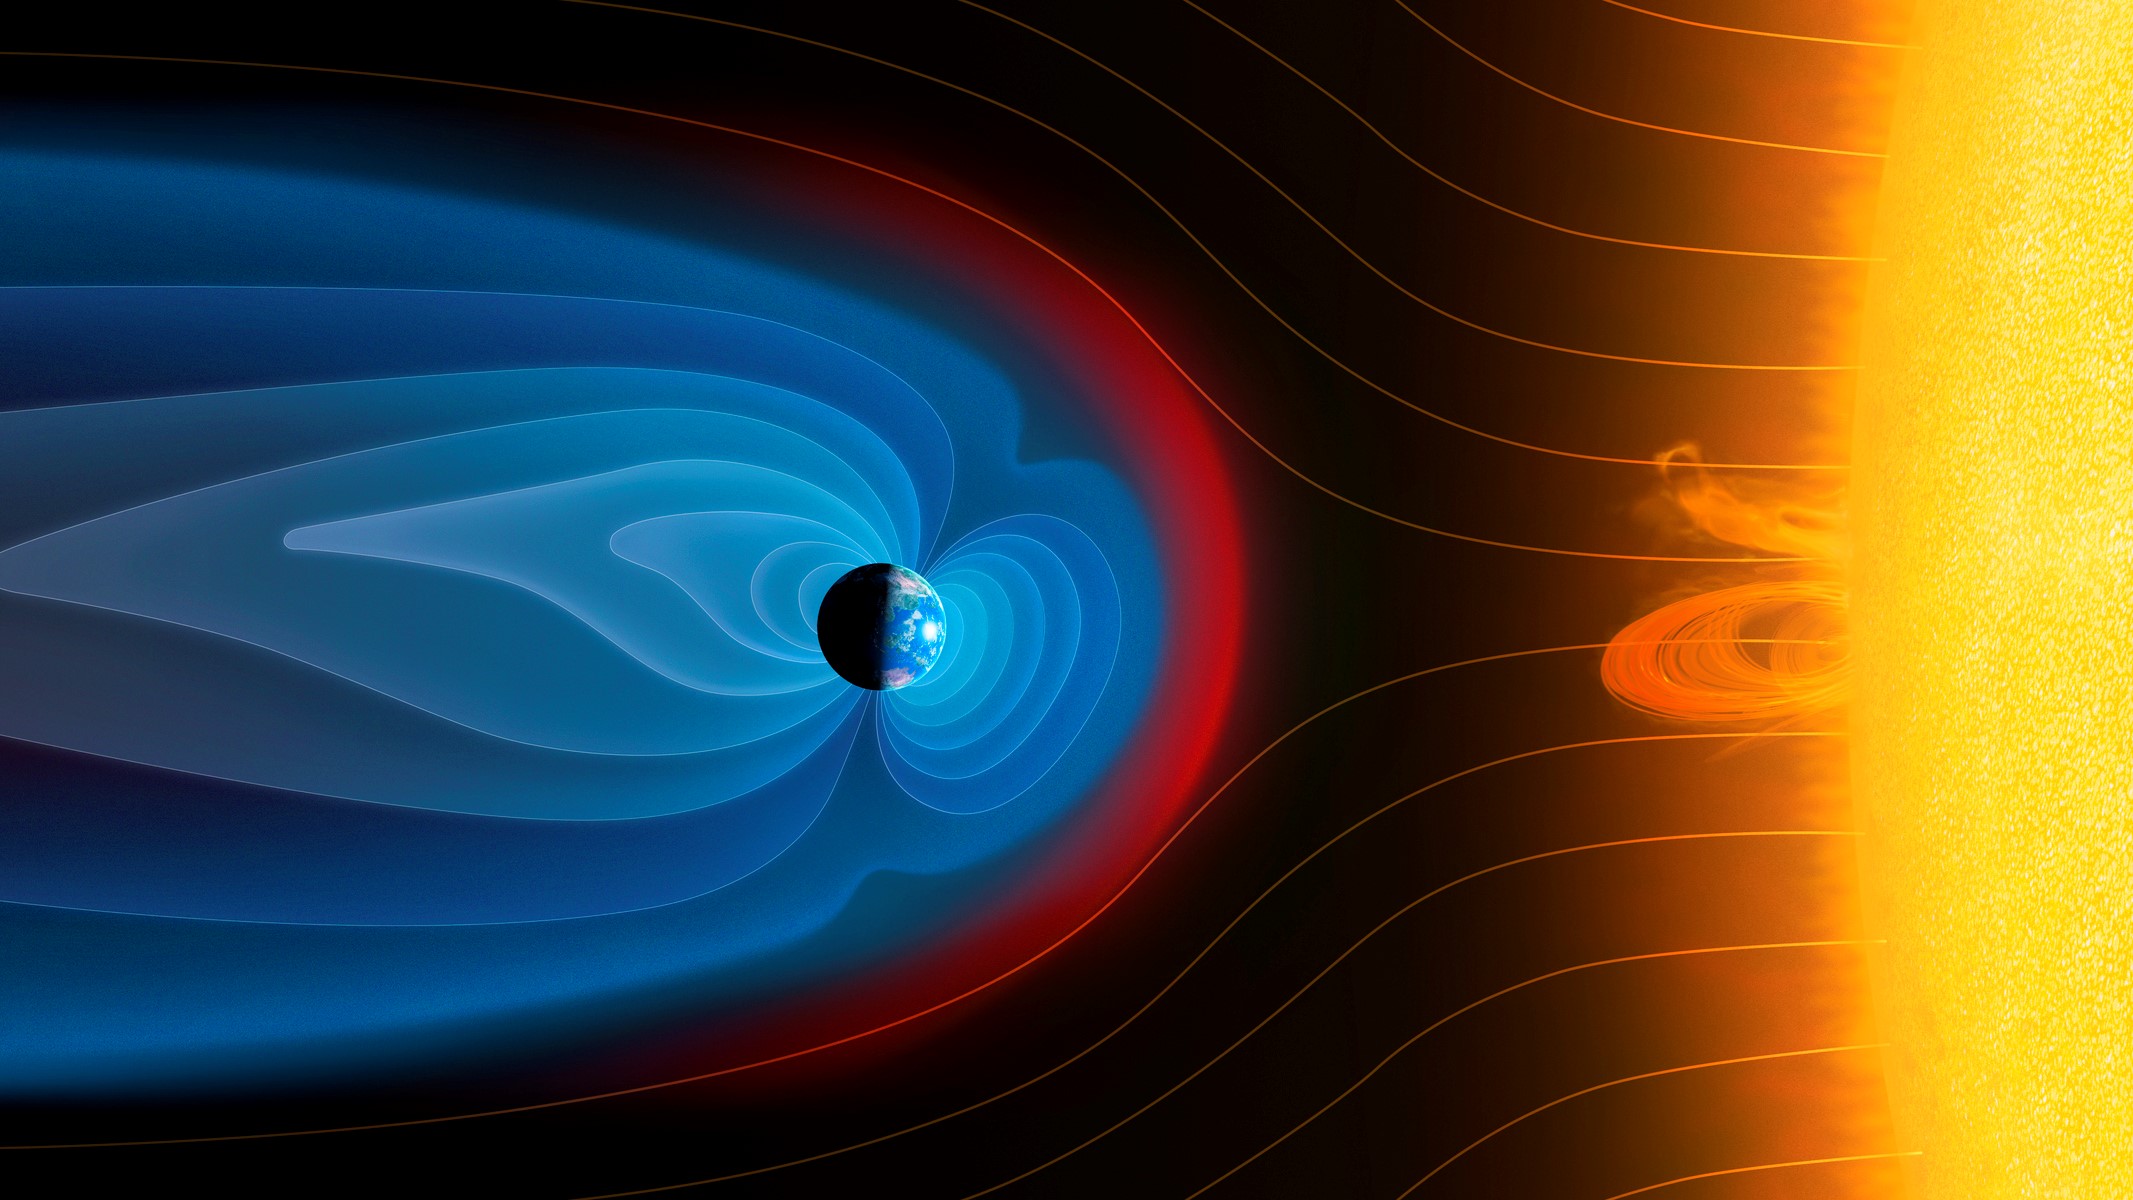 Artist's illustration showing Earth's magnetosphere surrounding the planet.